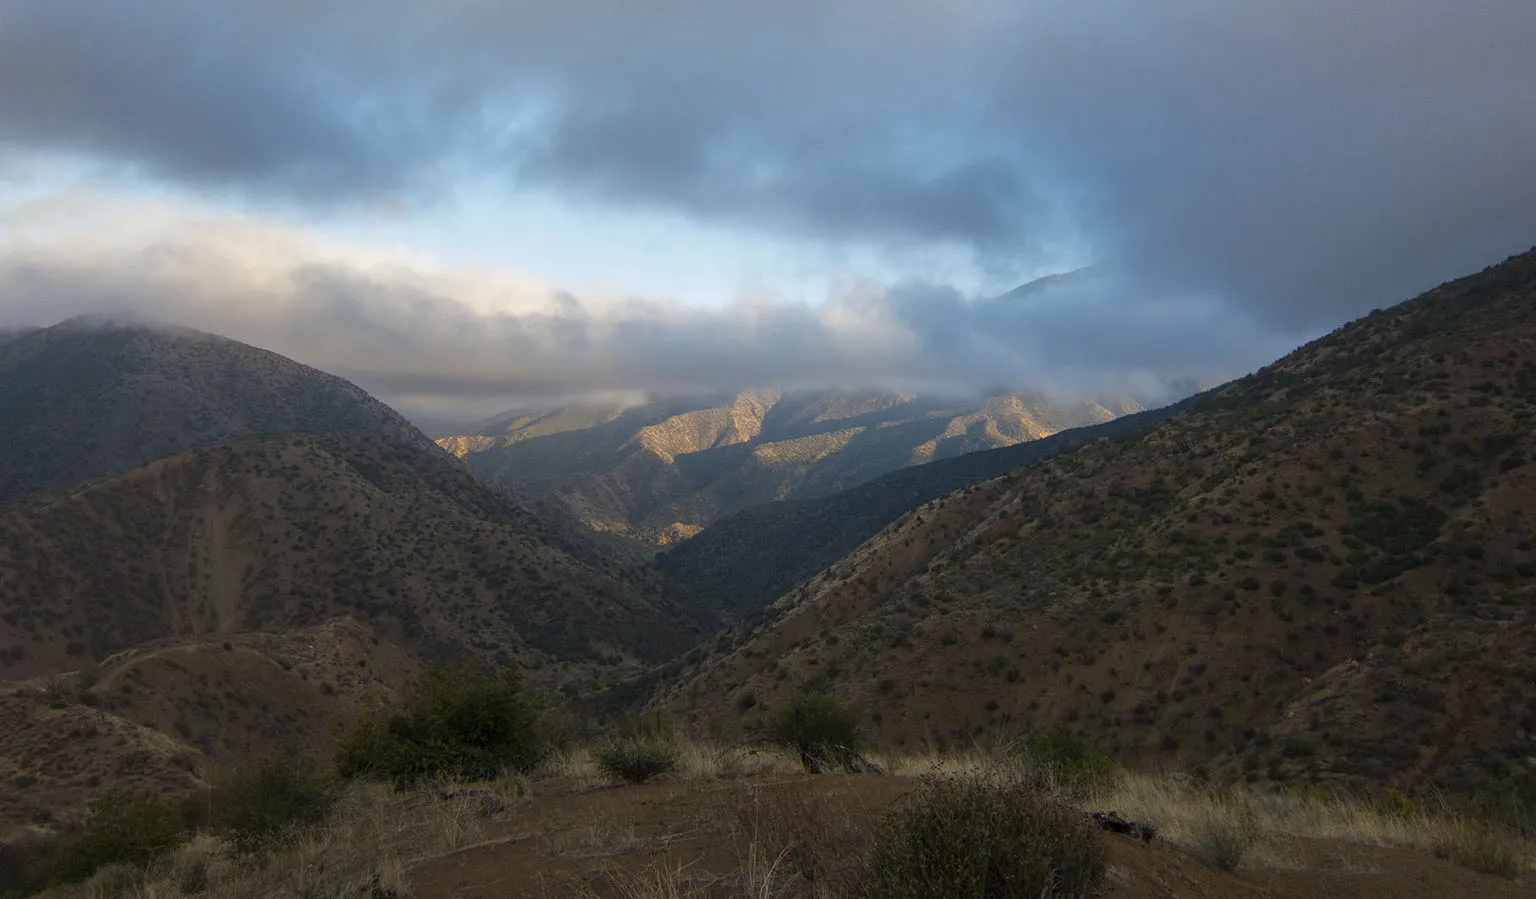 Looking down from the Johnston Ridge Trail into the the Sespe Creek gorge and the Topa Topa Mountains in the back. Topa Topa Peak hiding in the clouds on the right